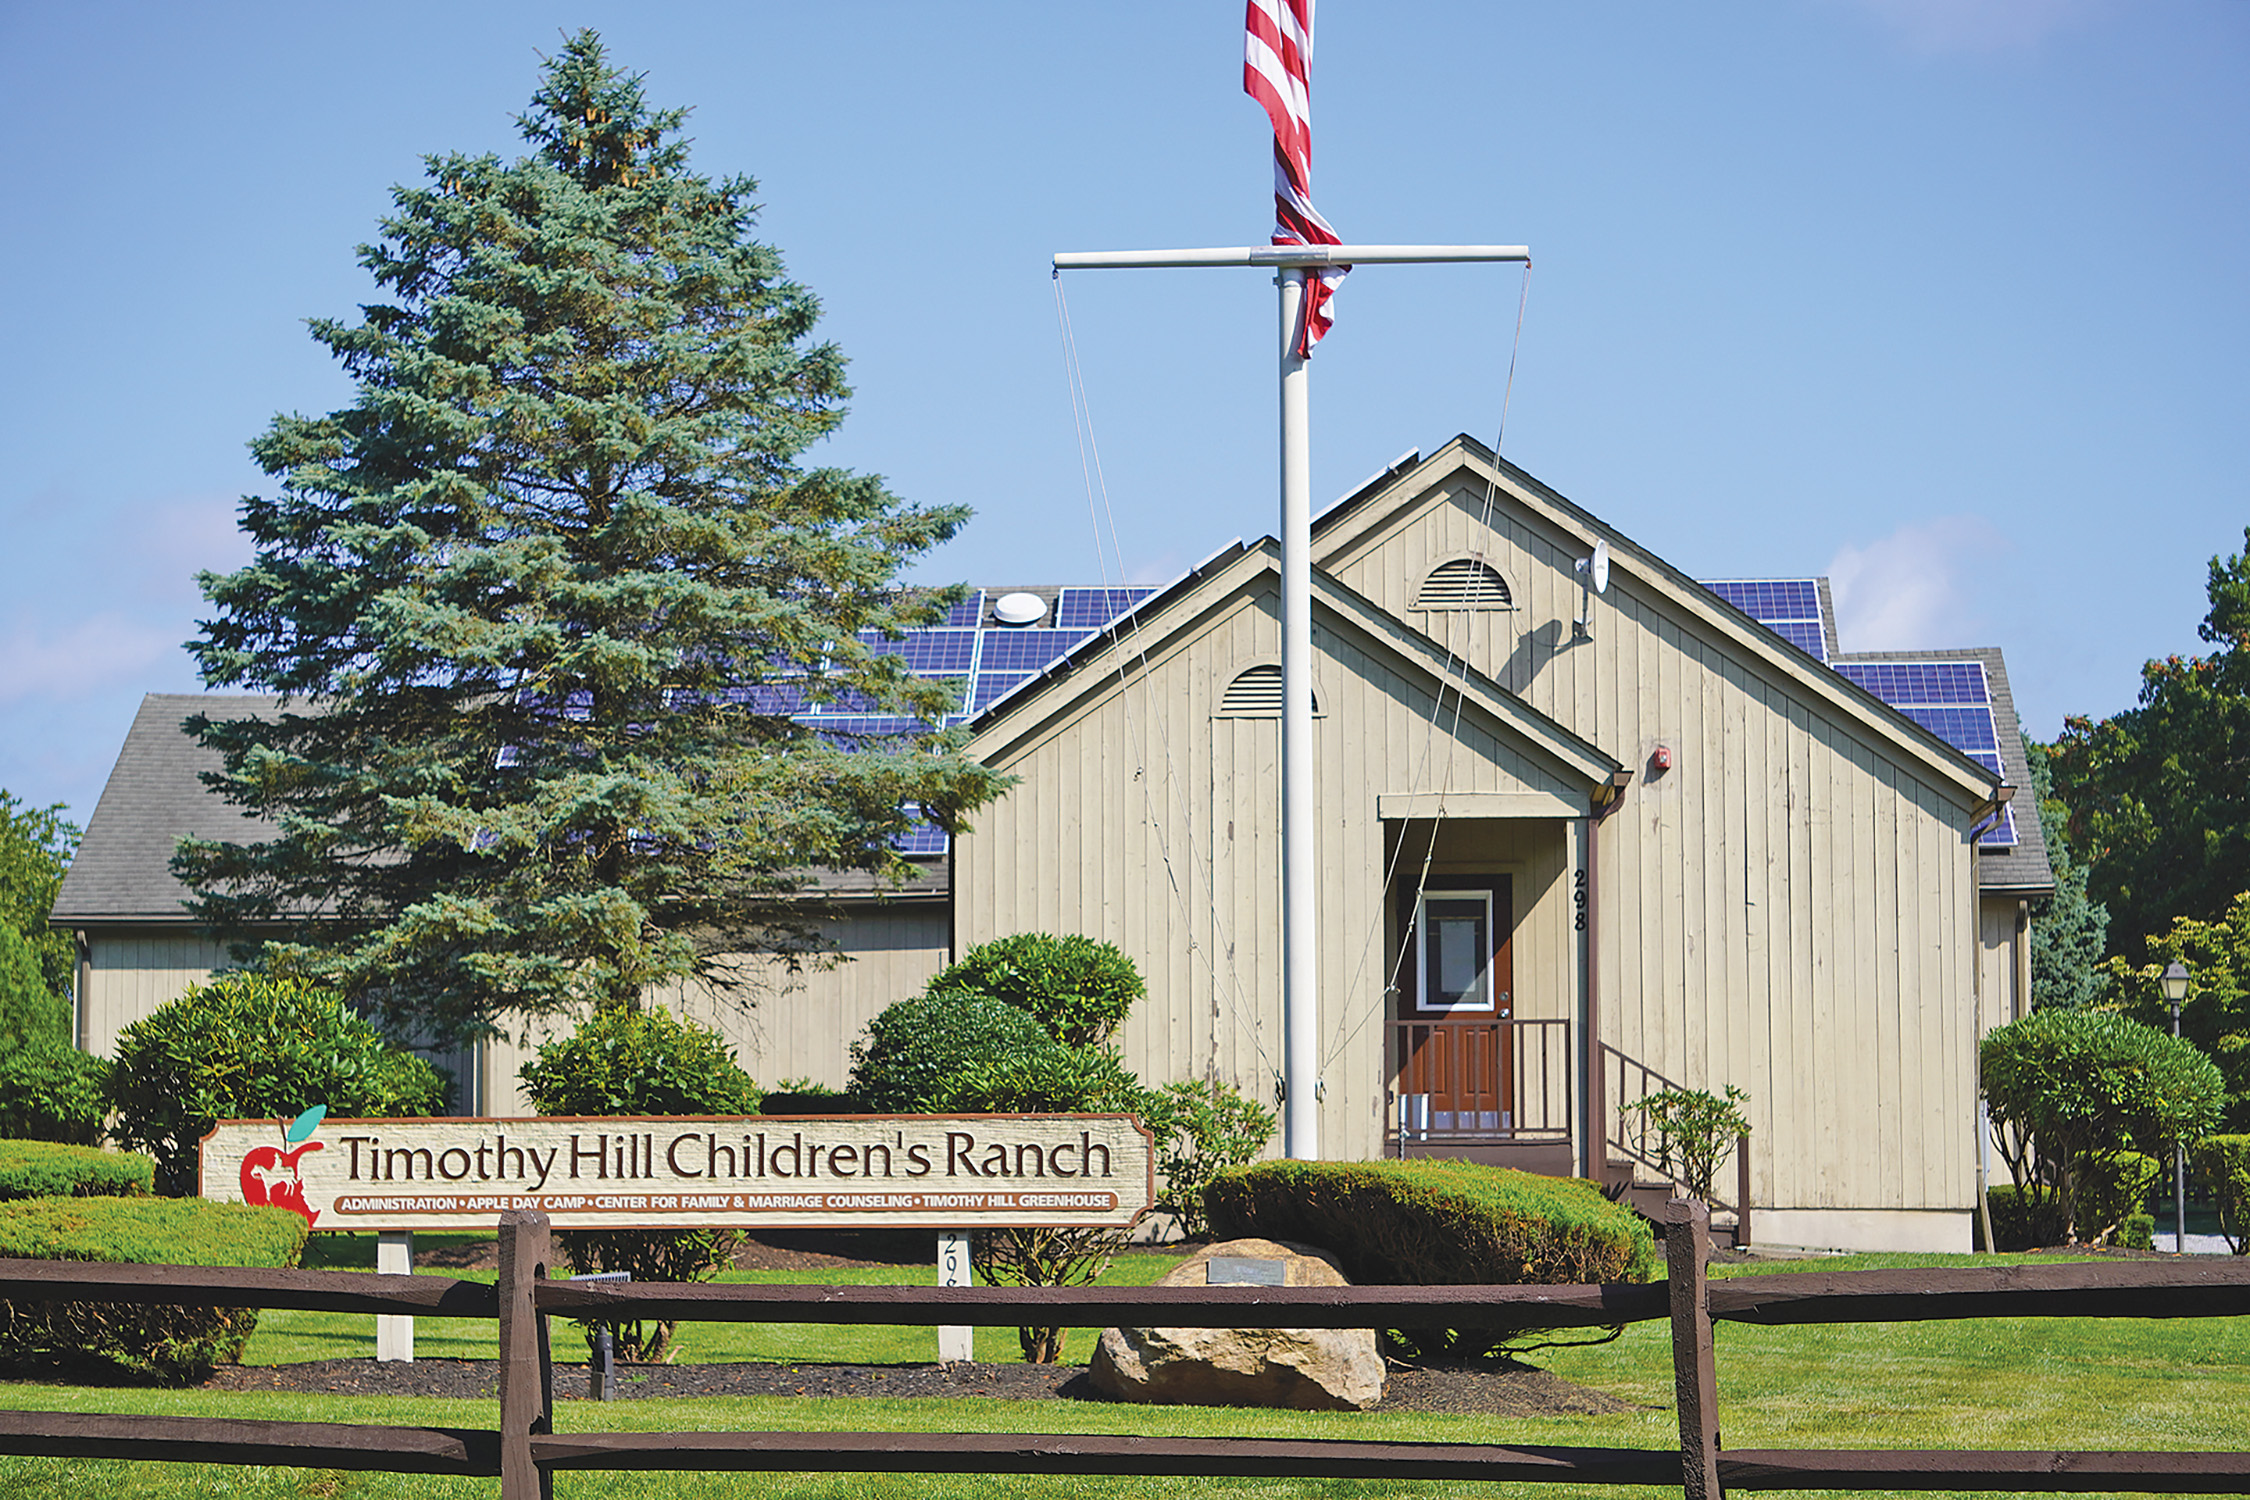 Timothy Hill Children's Ranch files for bankruptcy - Riverhead News Review